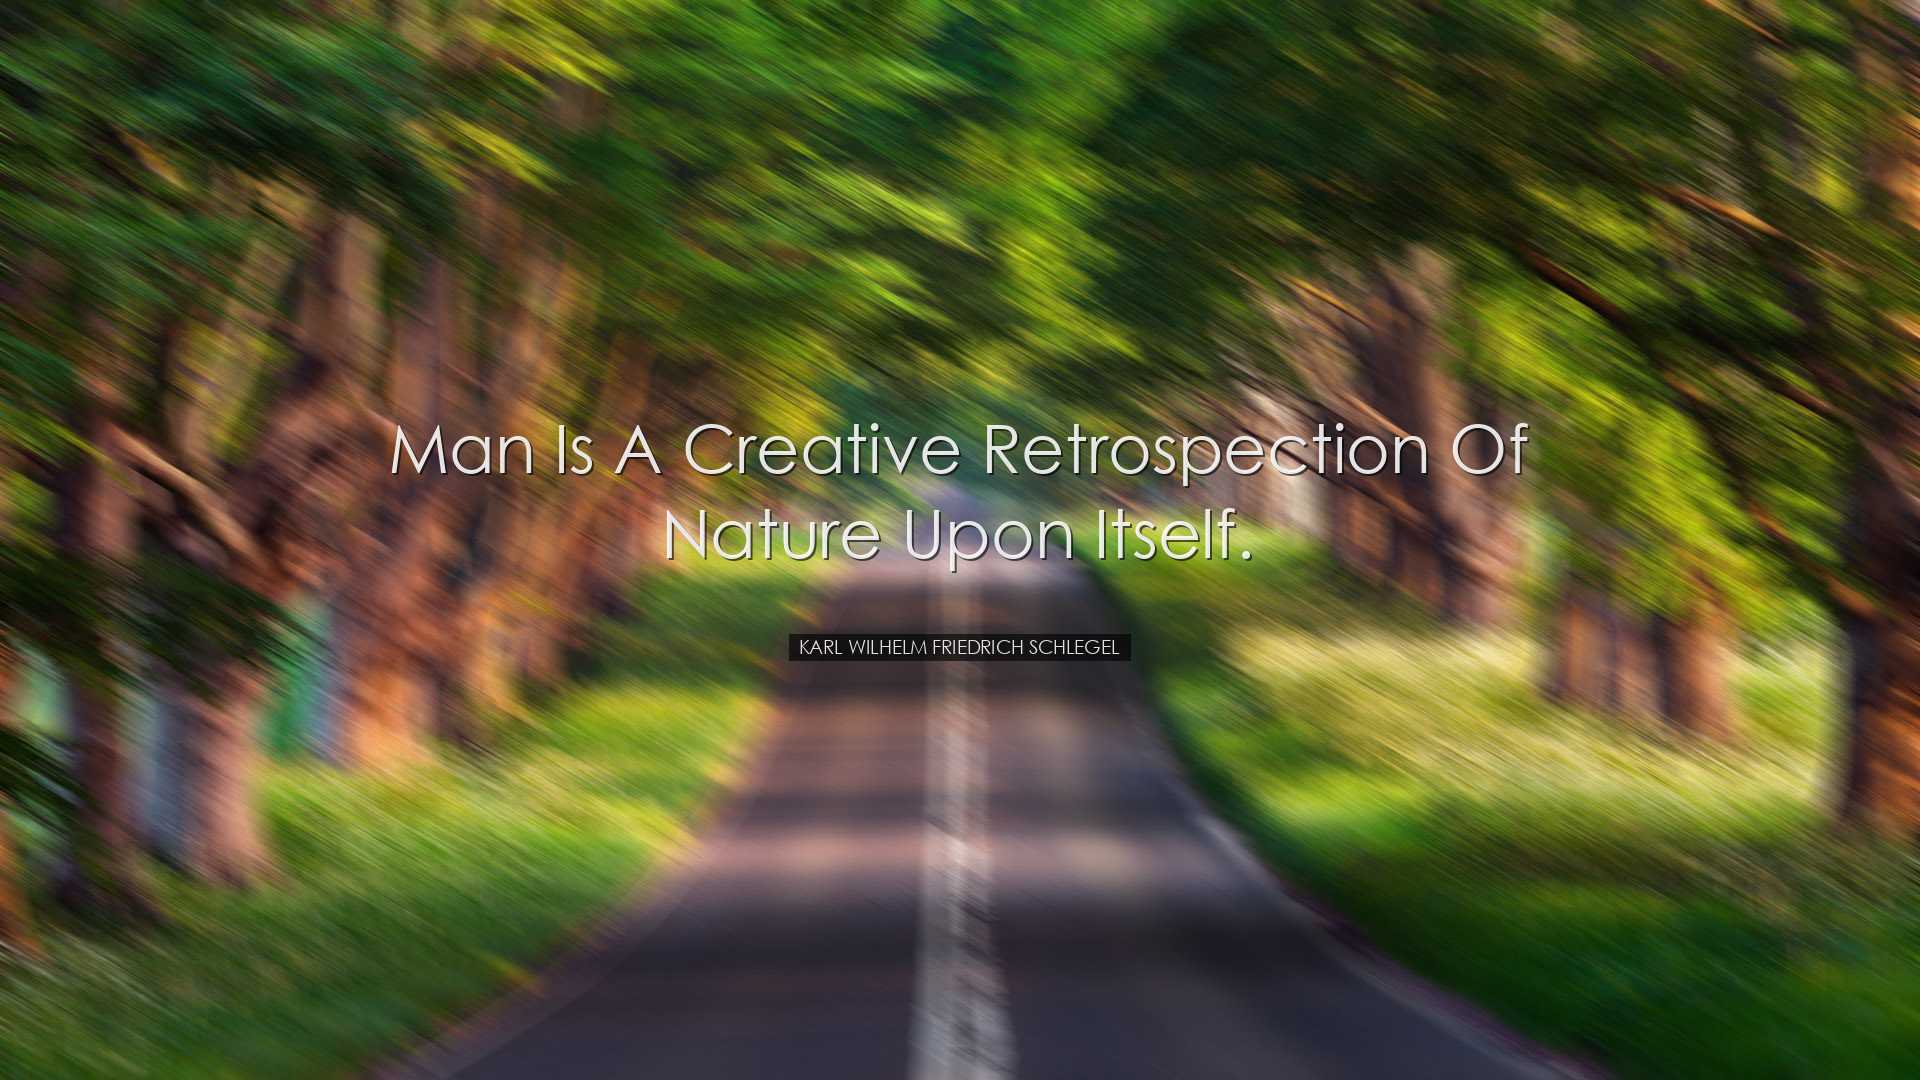 Man is a creative retrospection of nature upon itself. - Karl Wilh